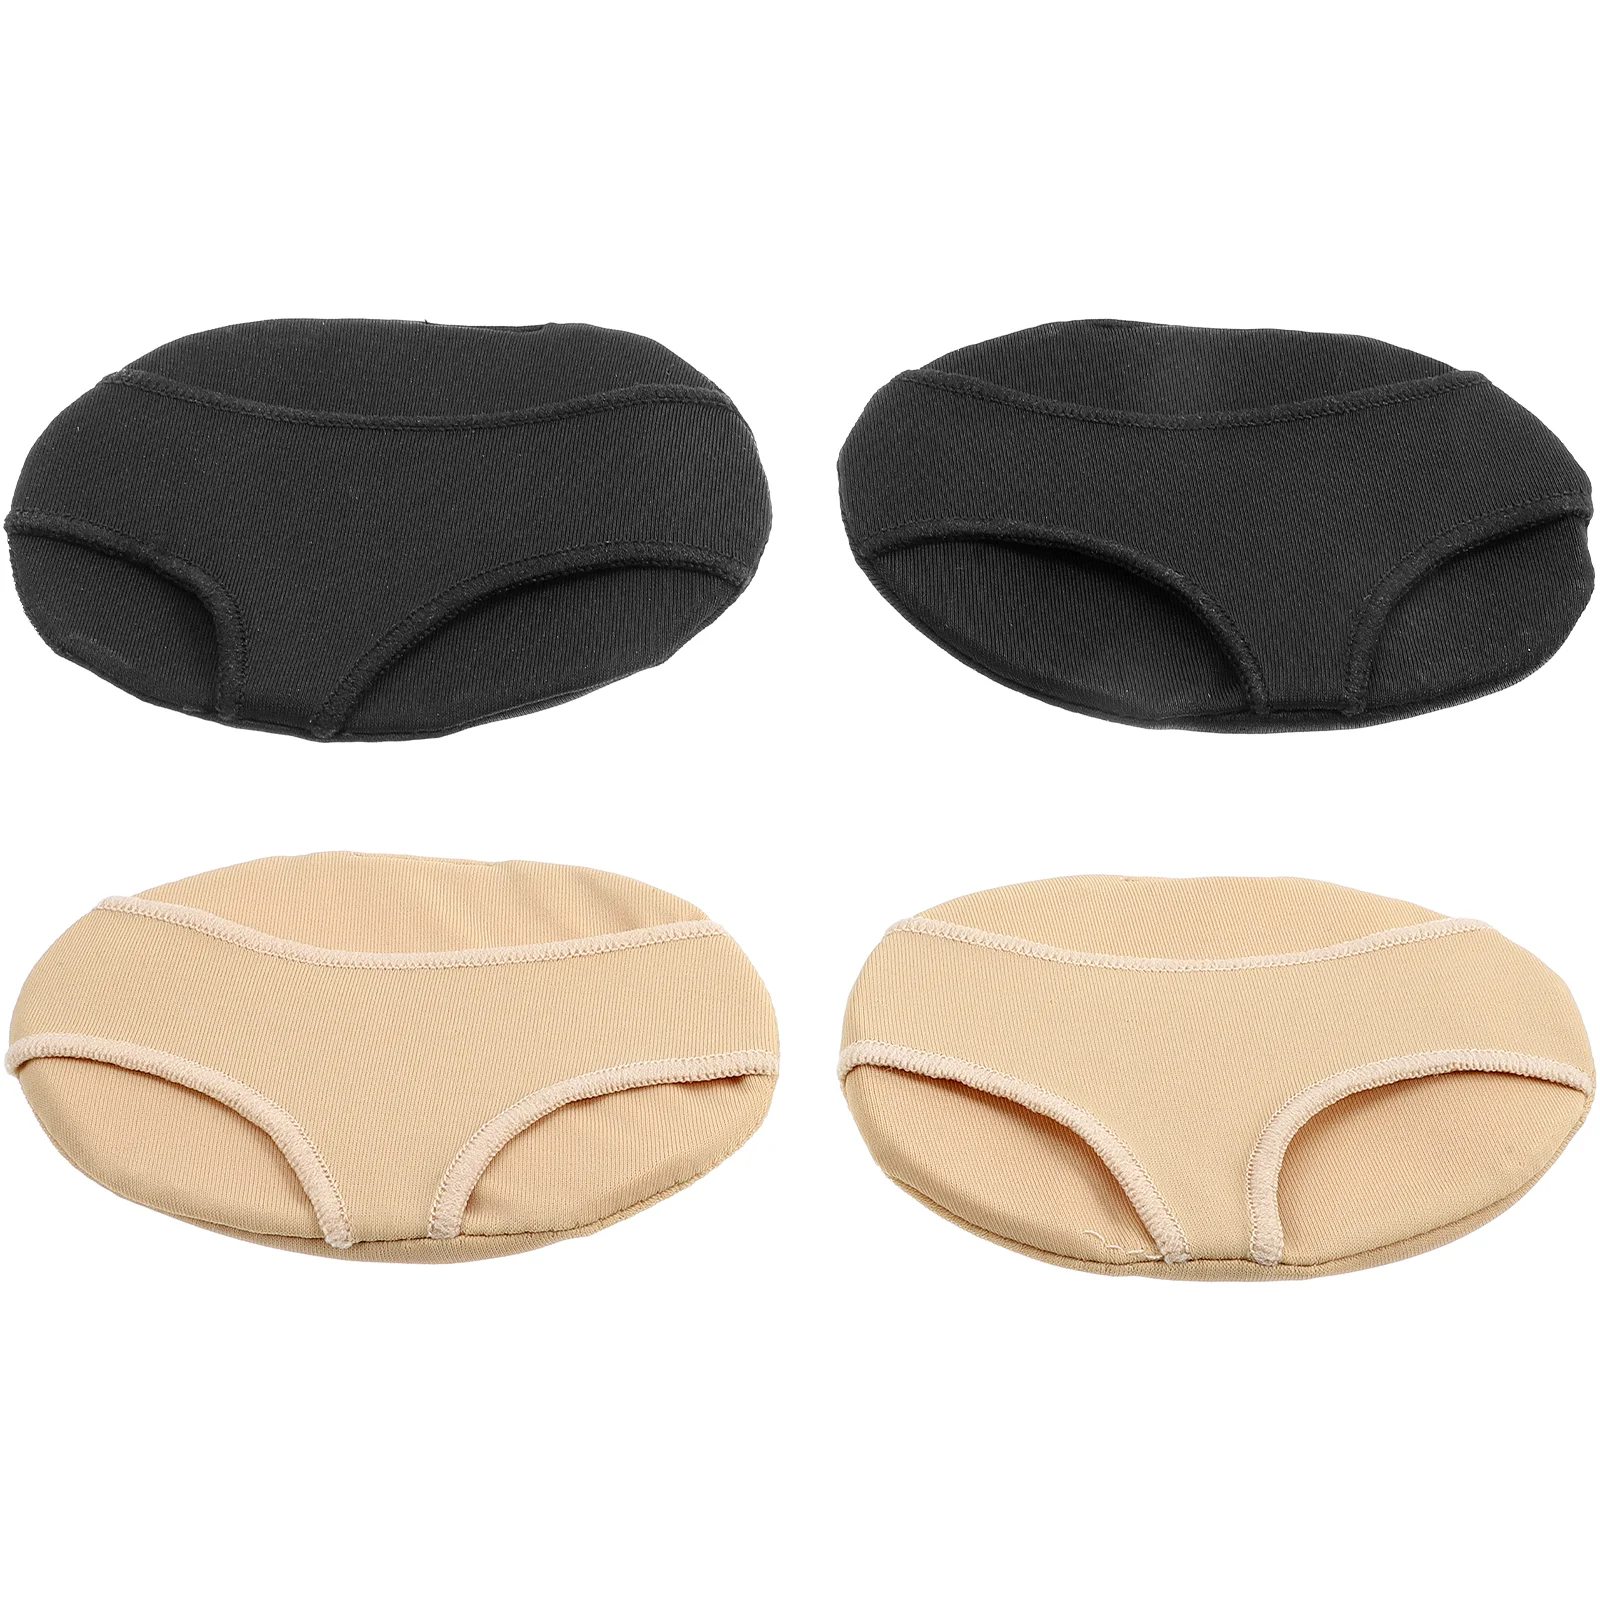 

2 Pairs Forefoot Pad Plantillas De Gel Para Hombre Pads Cushion High Heels Metatarsal Pain Relief Support Cushions Lycra Man